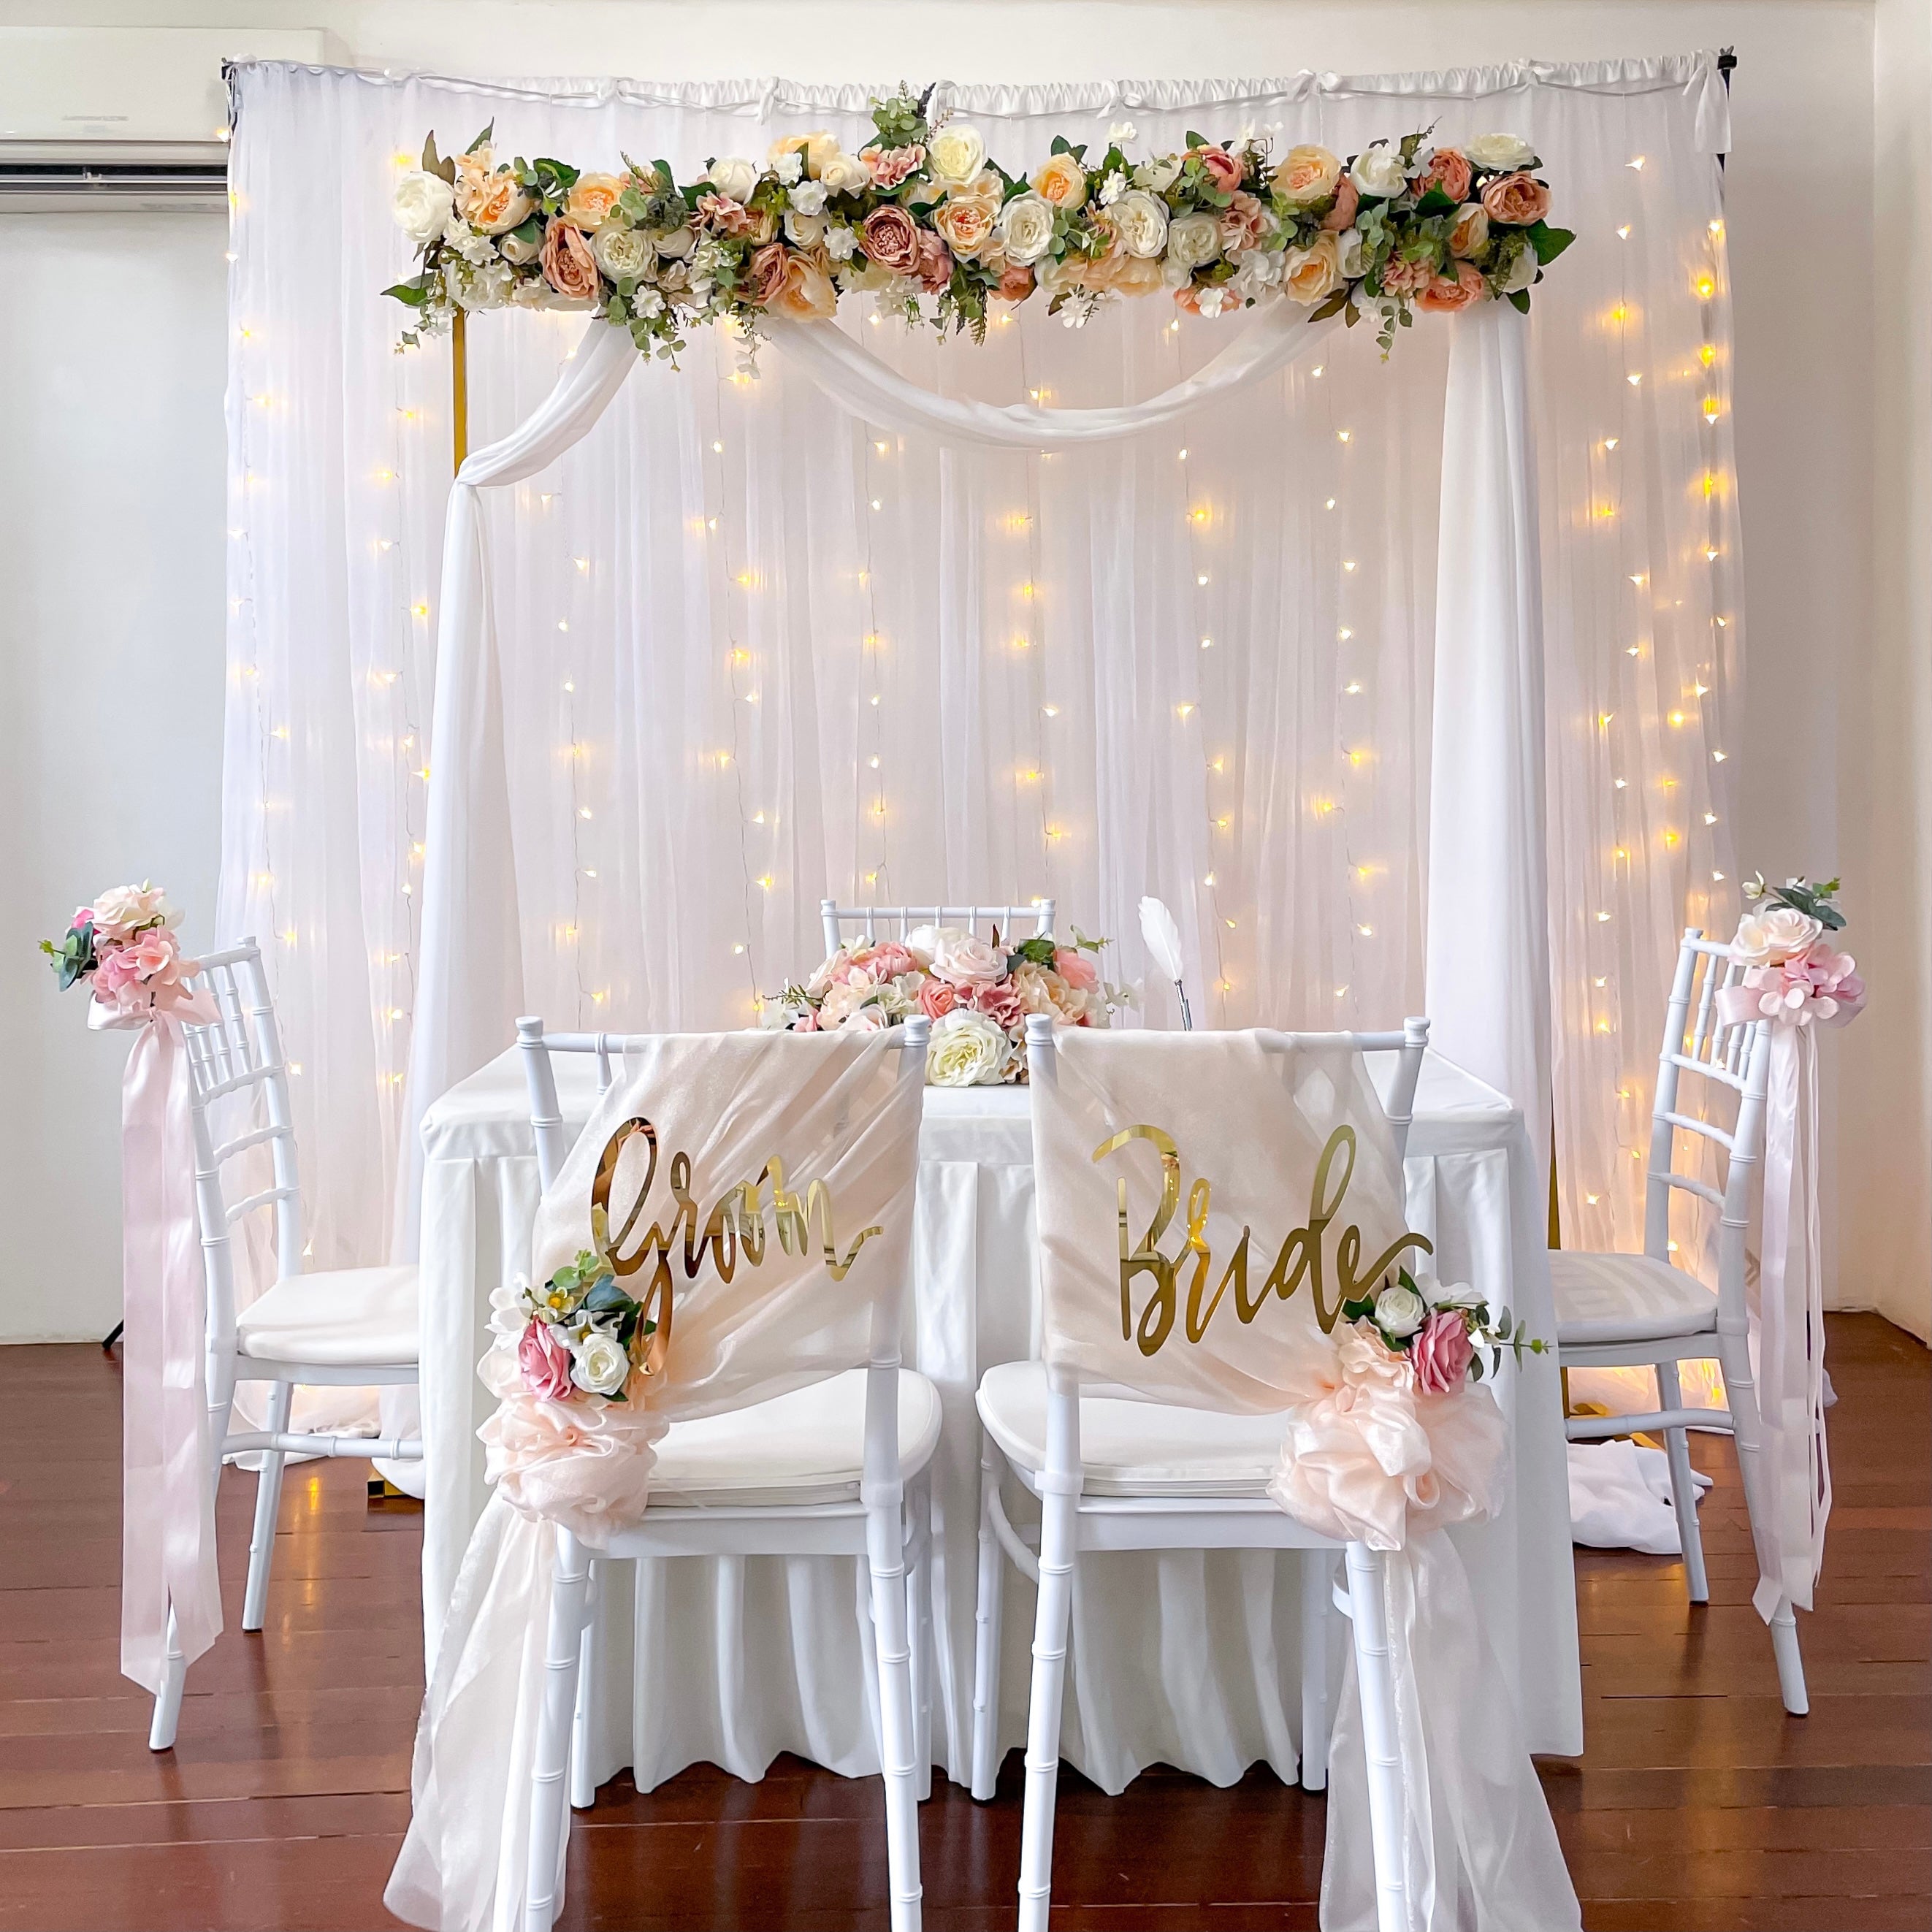 Sweet and Simple Home Solemnisation/ROM Decor in Singapore - Pink & White Theme with Fairy-lights